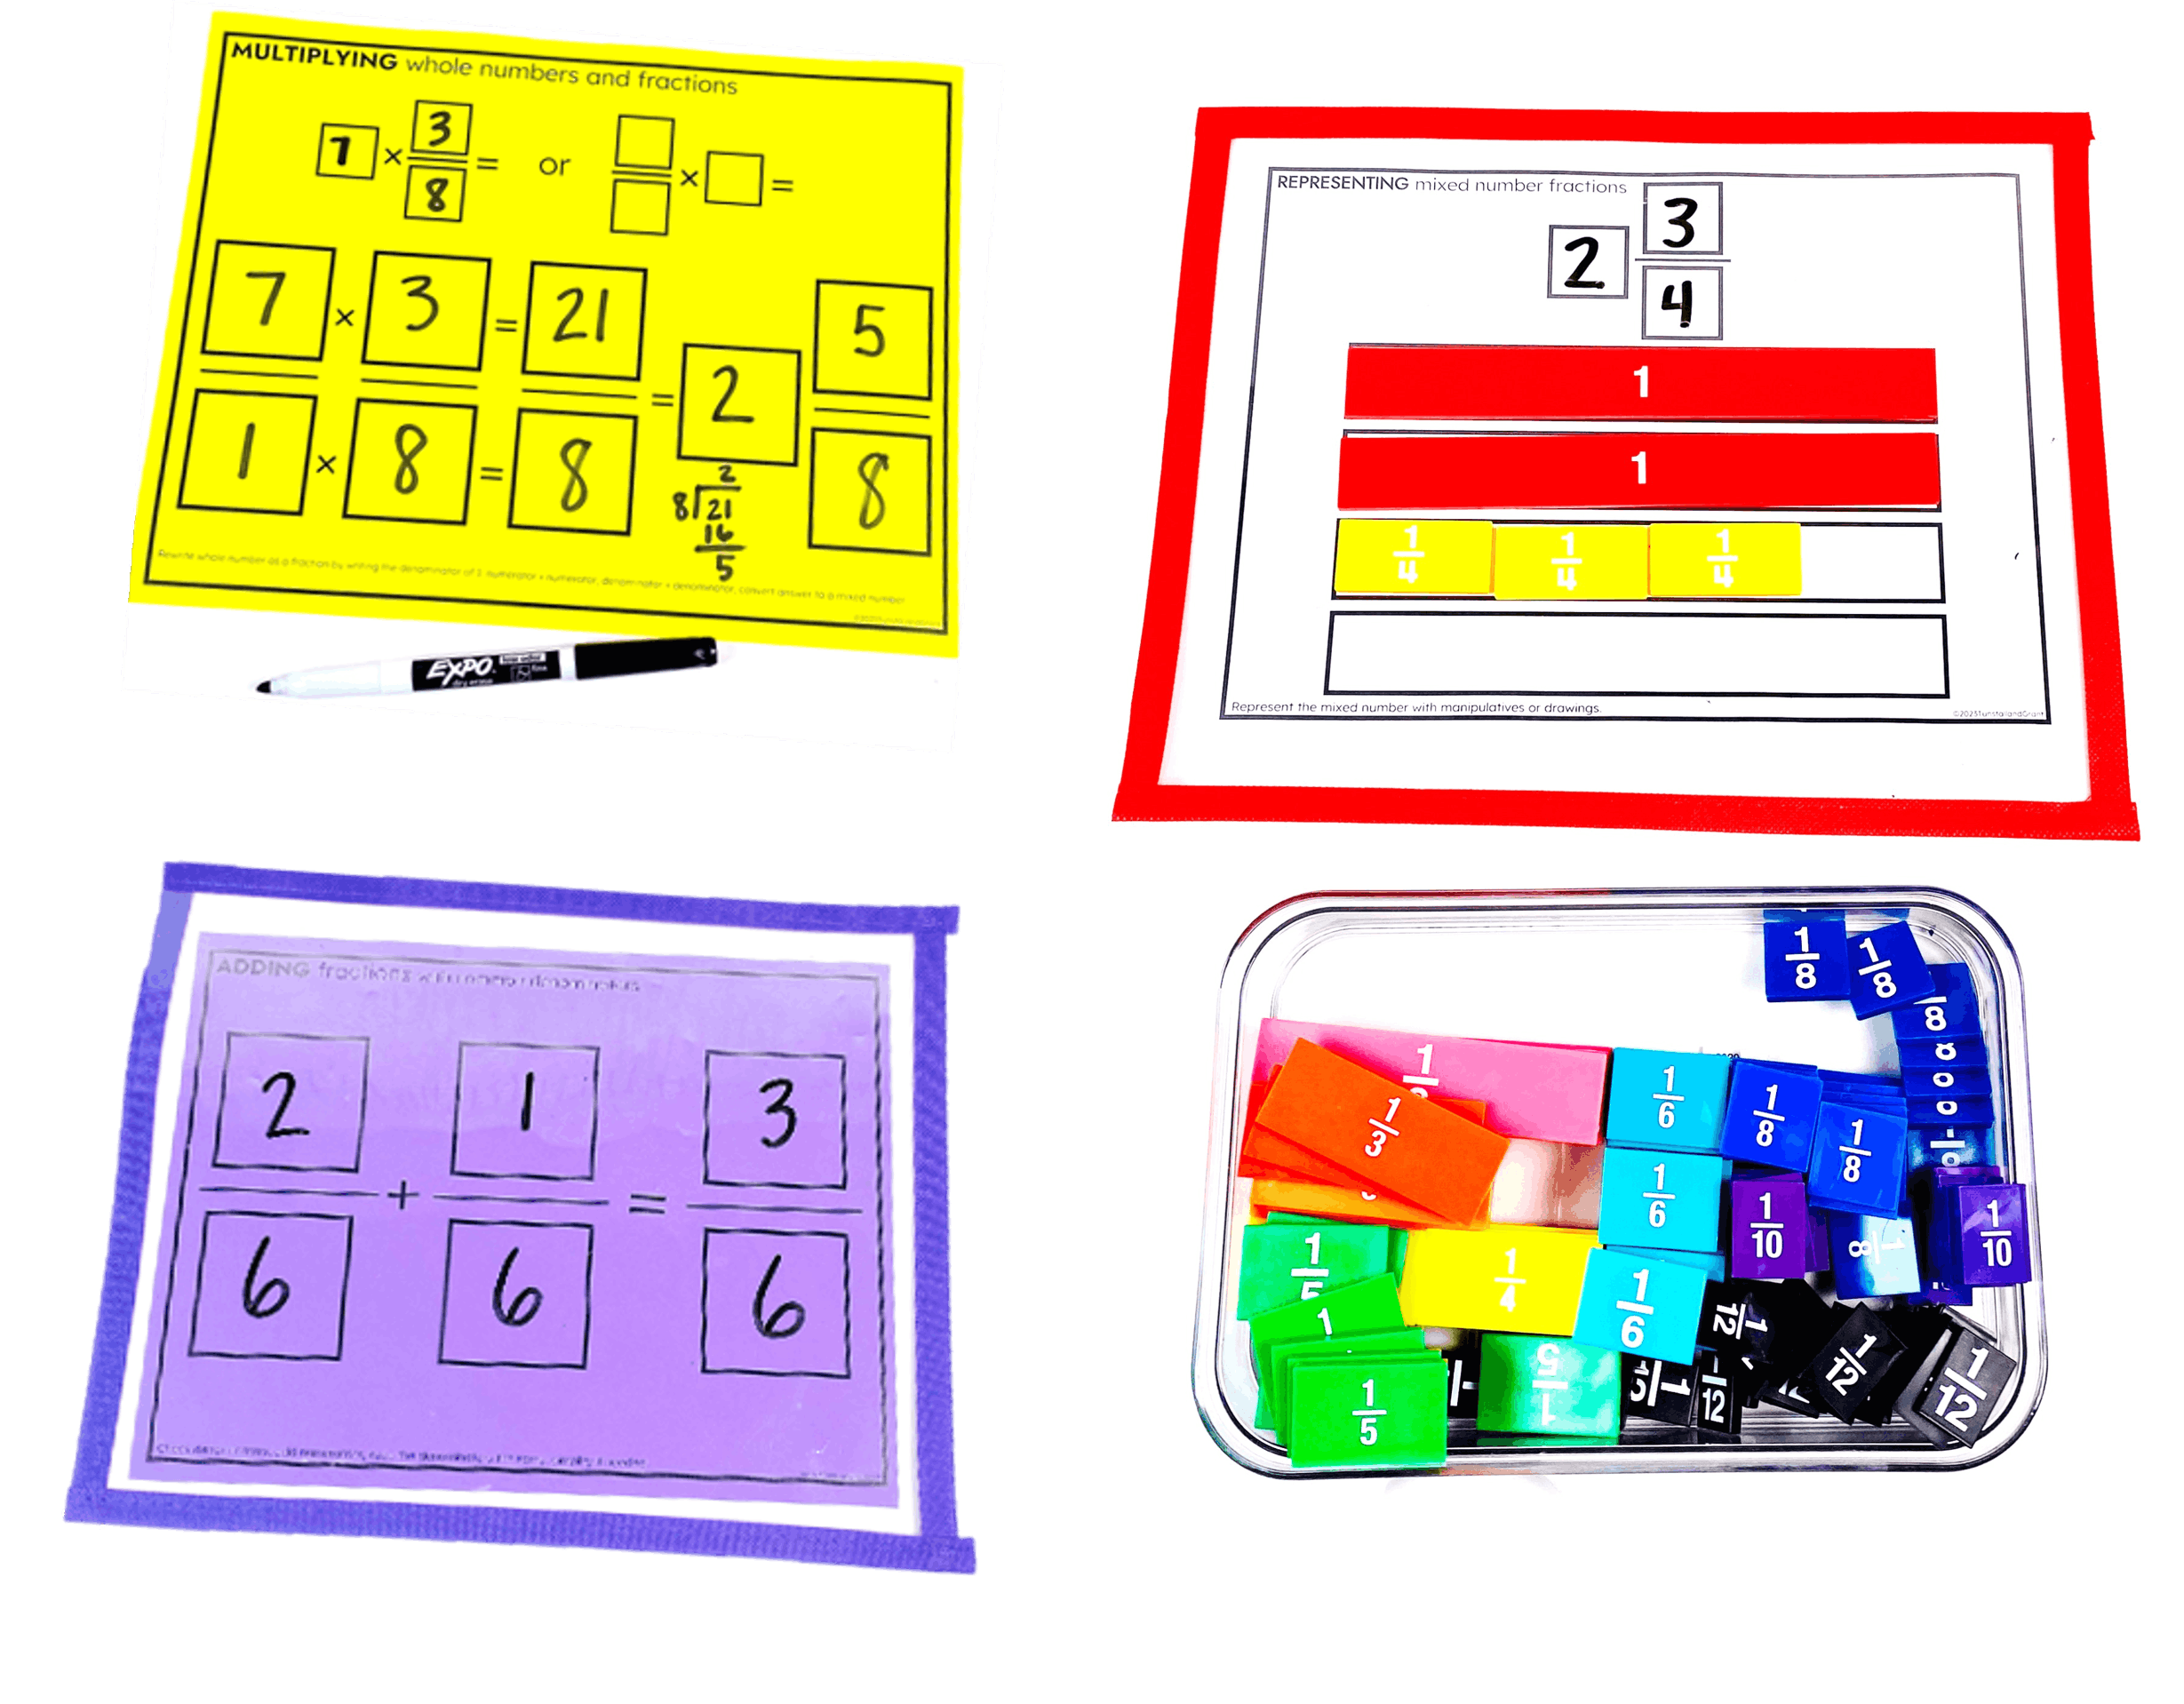 Understanding fractions, K-5 teaching resources, teaching resources online, k-5 math learning, tunstall's teaching